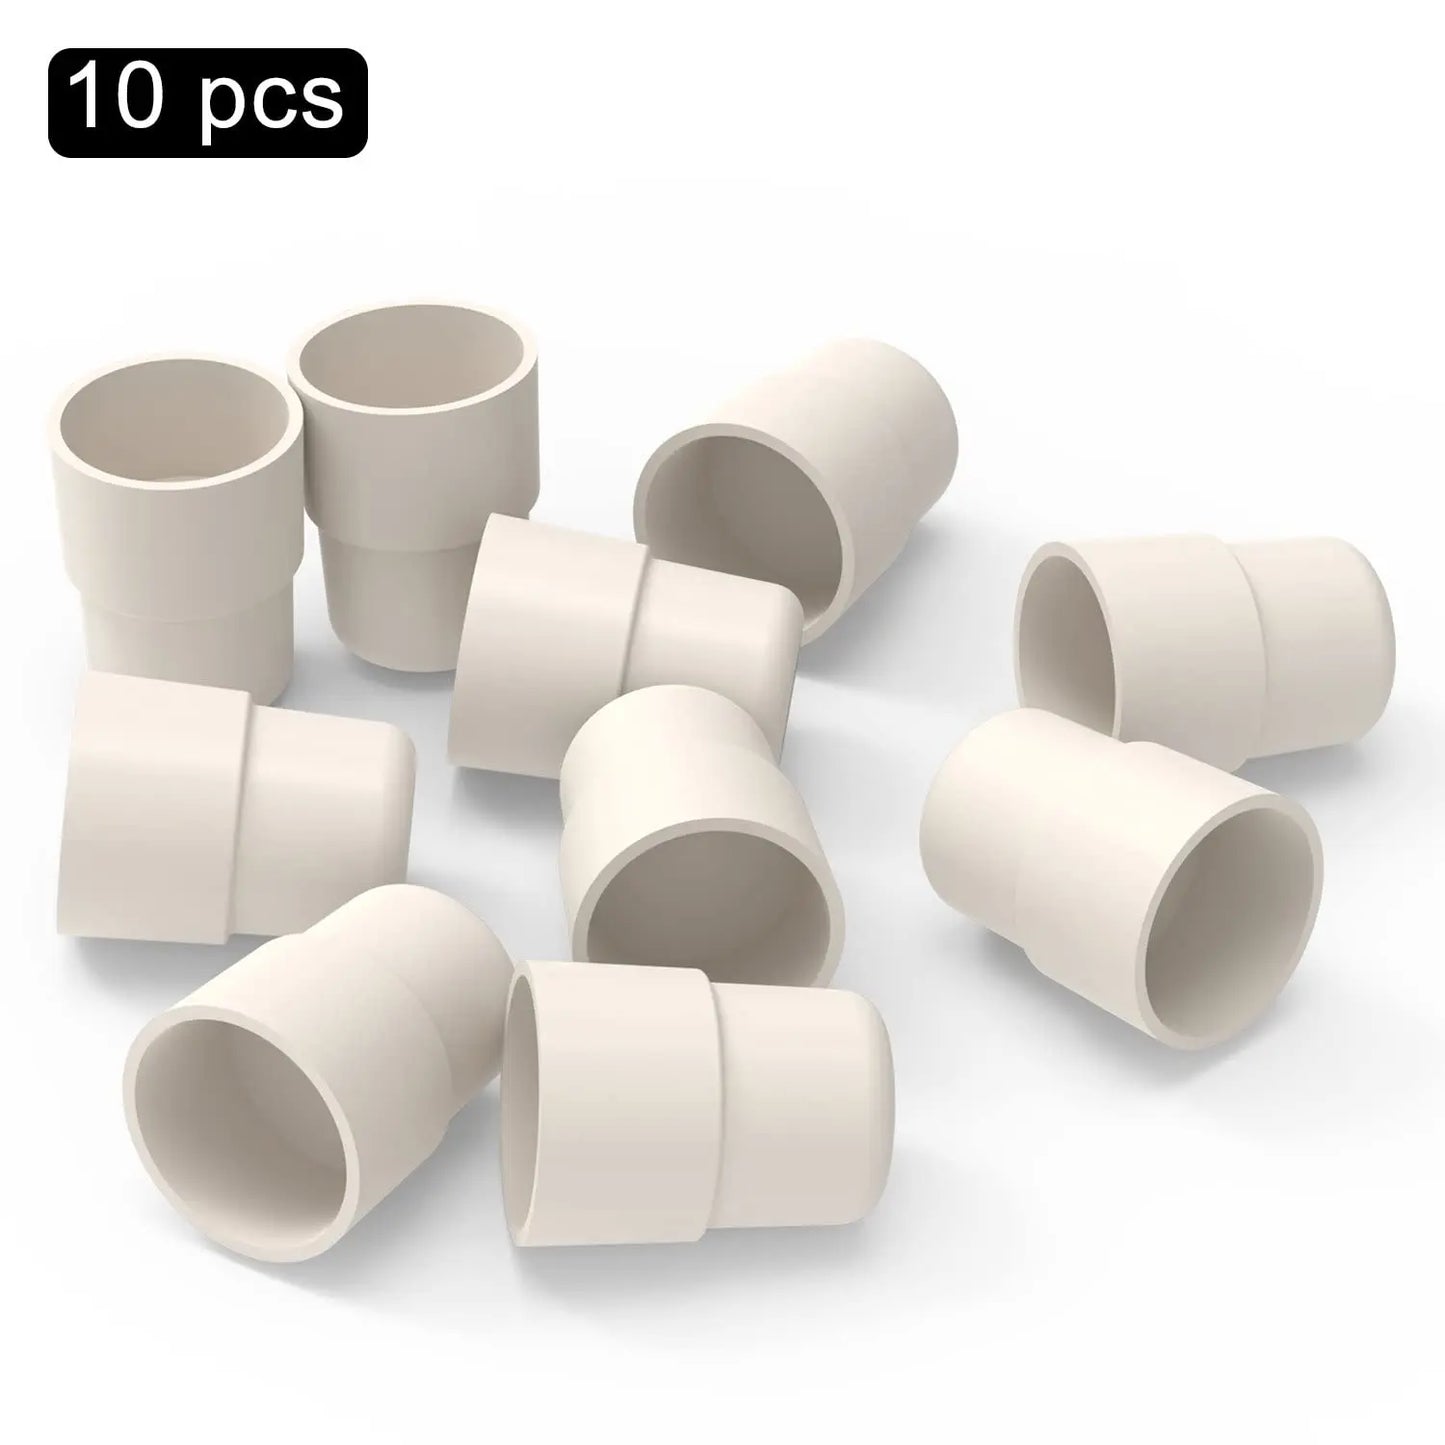 Rubber Stopper, 14/19/24#, Pack of 10 Stoppers